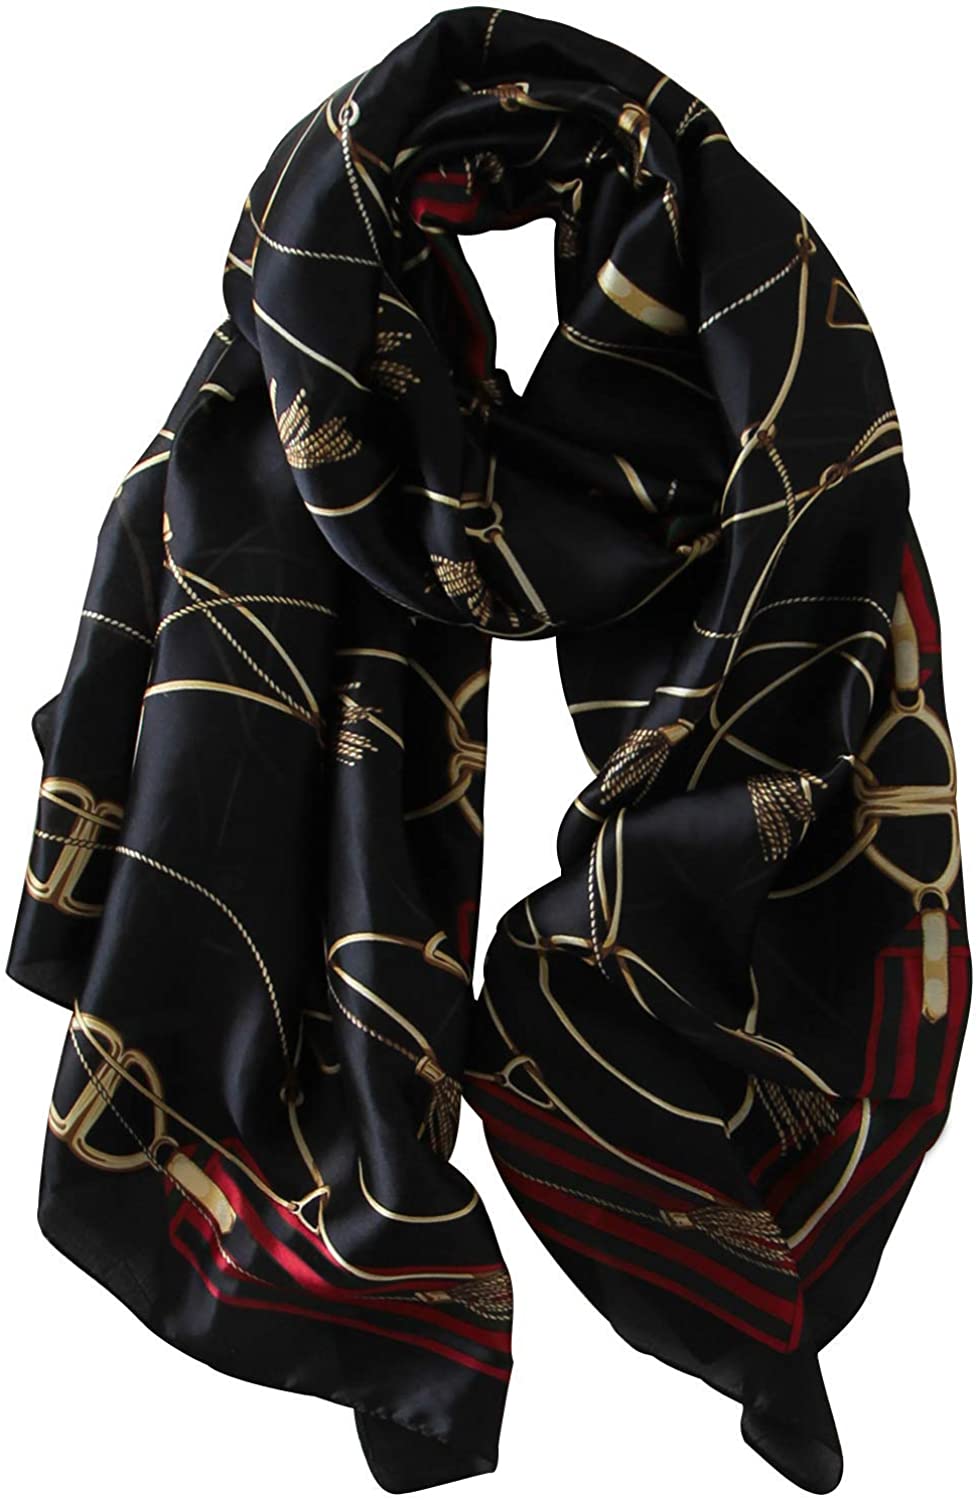 Cuddle Dreams Women's Silk Scarves for Winter, 100% Mulberry Silk Brushed, Luxuriously Soft & Warm, Decent Box Packed